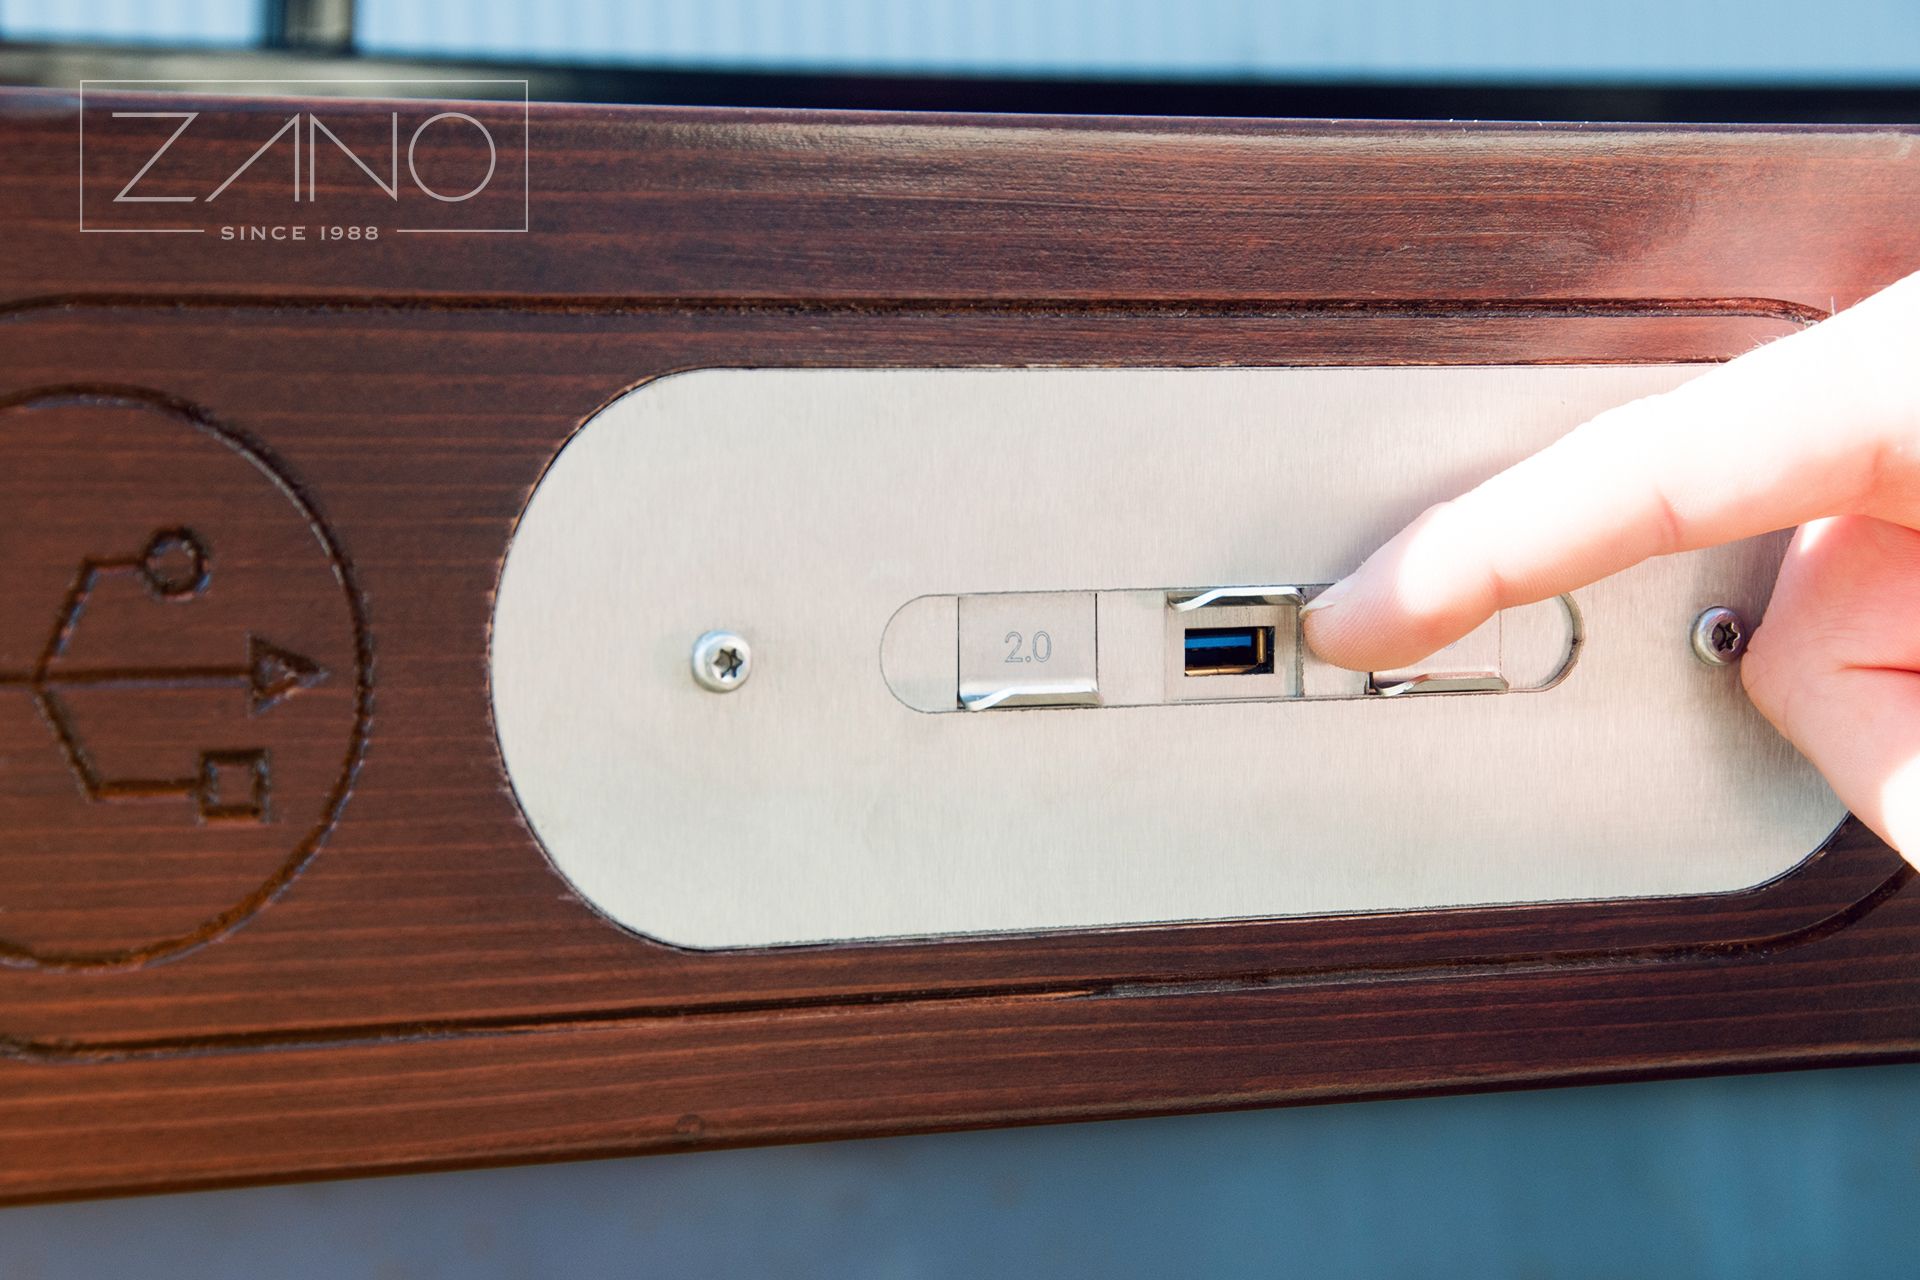 Simple and fast charging of your smartphone thanks to the USB on the solar bench